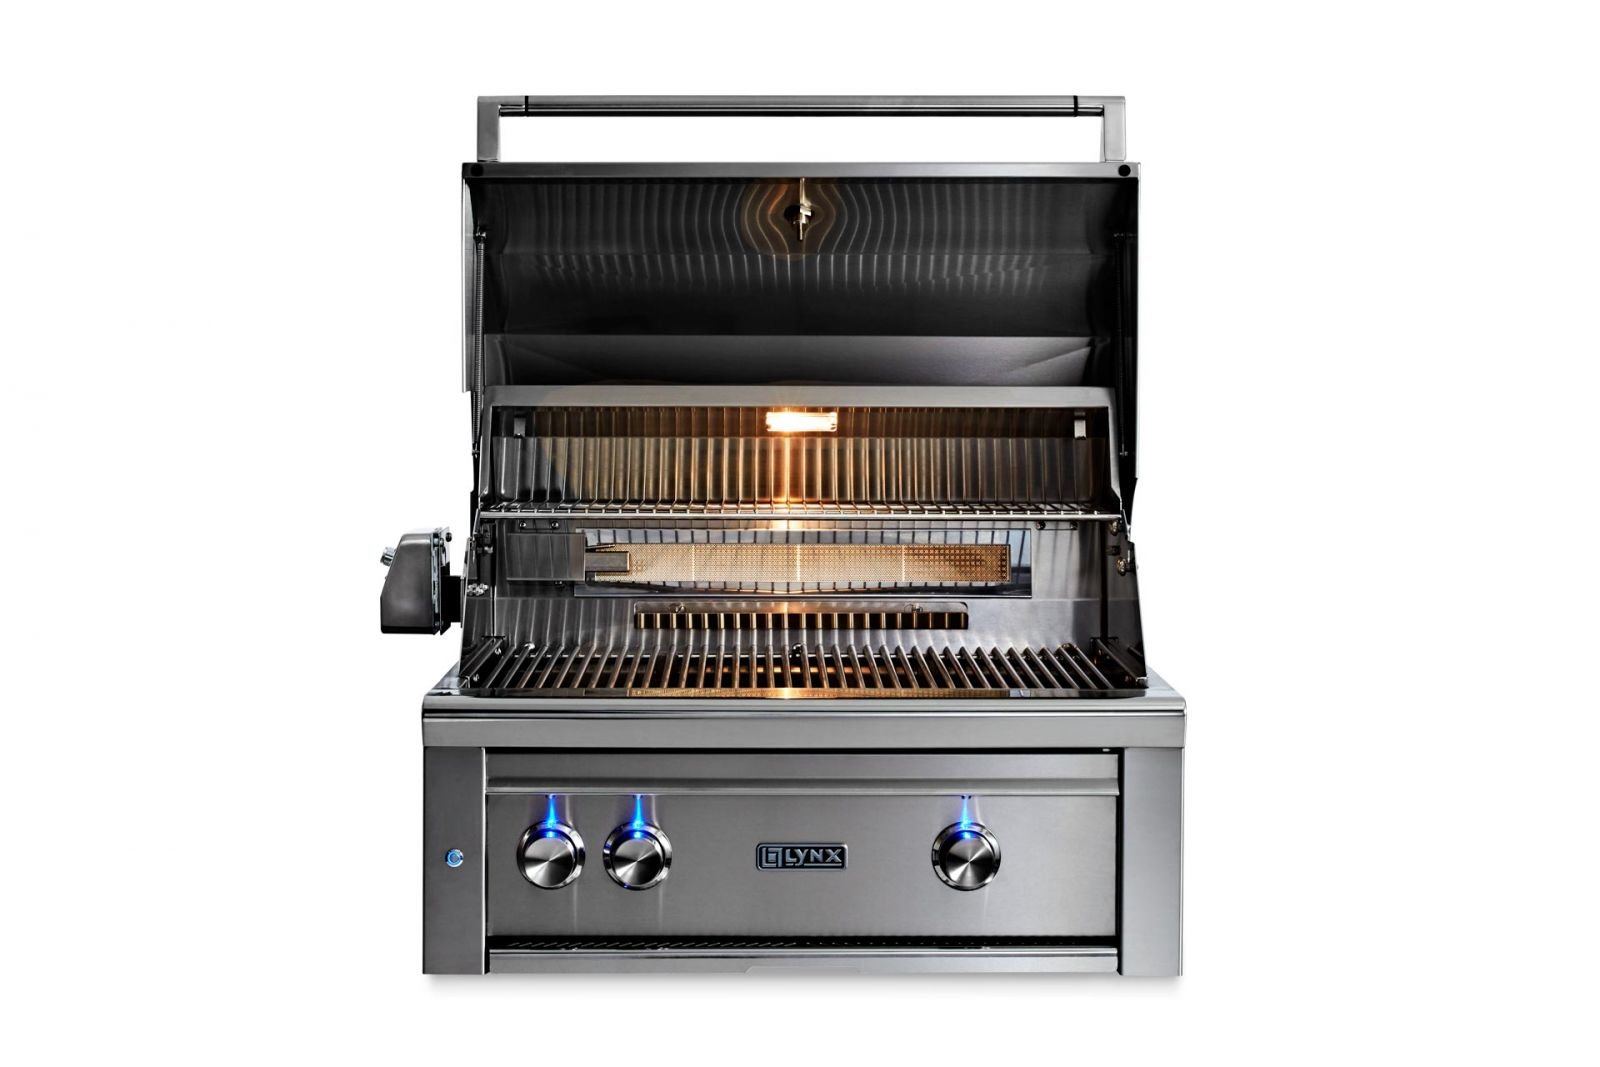 30" Professional Built-in Grill with All Ceramic Burners and Rotisserie (L30R-3)